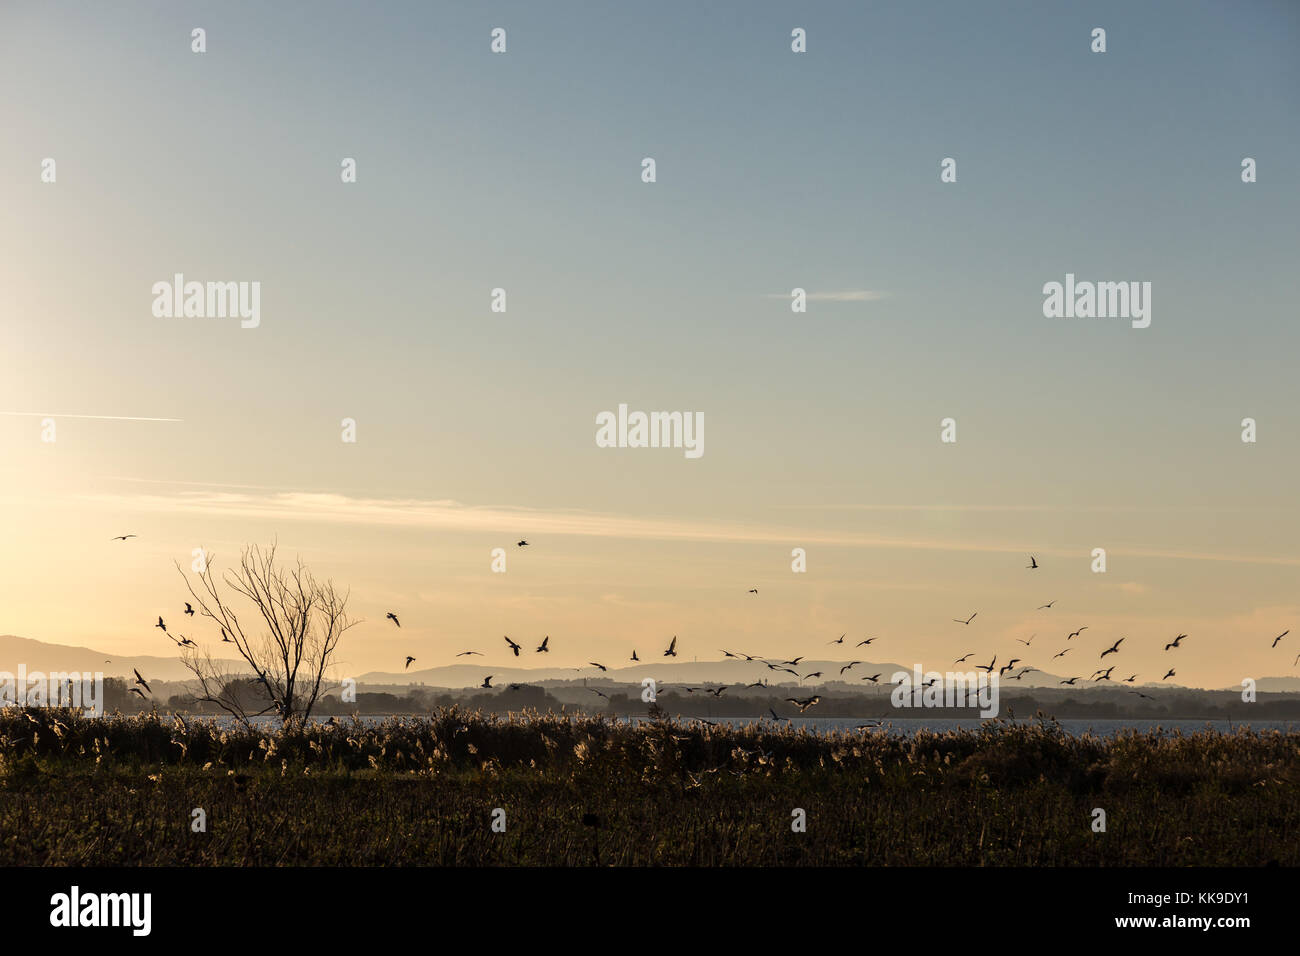 A flock of birds flying over a lake shore at sunset, with a tree and vegetation in the foreground and distant hills in the background Stock Photo